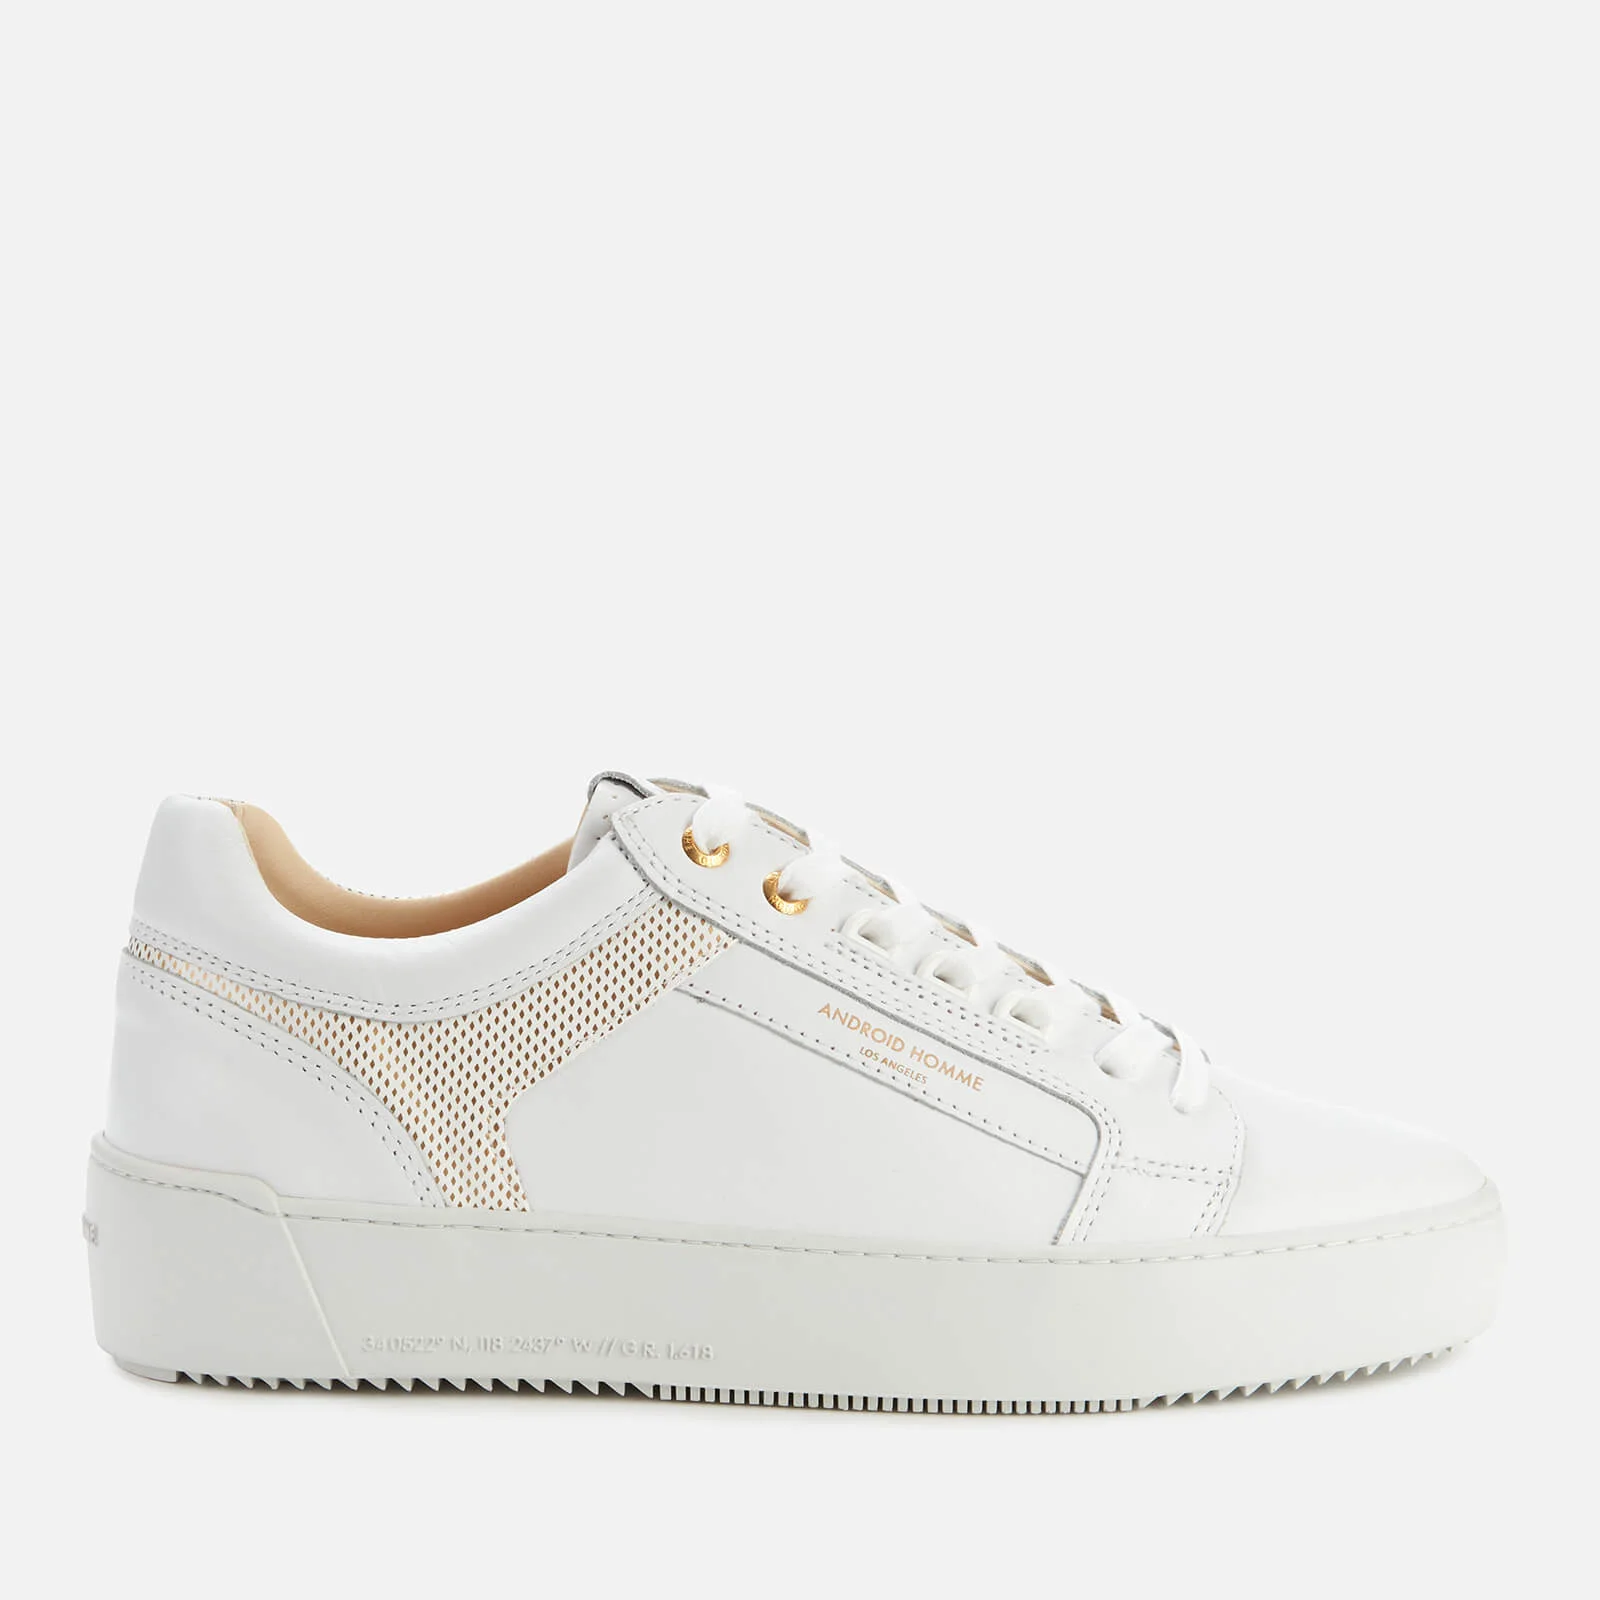 Android Homme Men's Venice Metallic Trainers - White/Gold Image 1